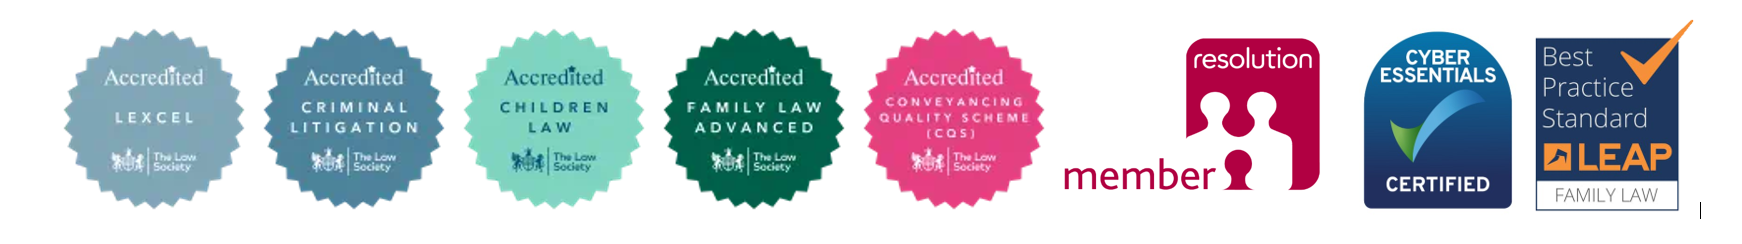 The Law Society Family Law Advanced Accredited logo